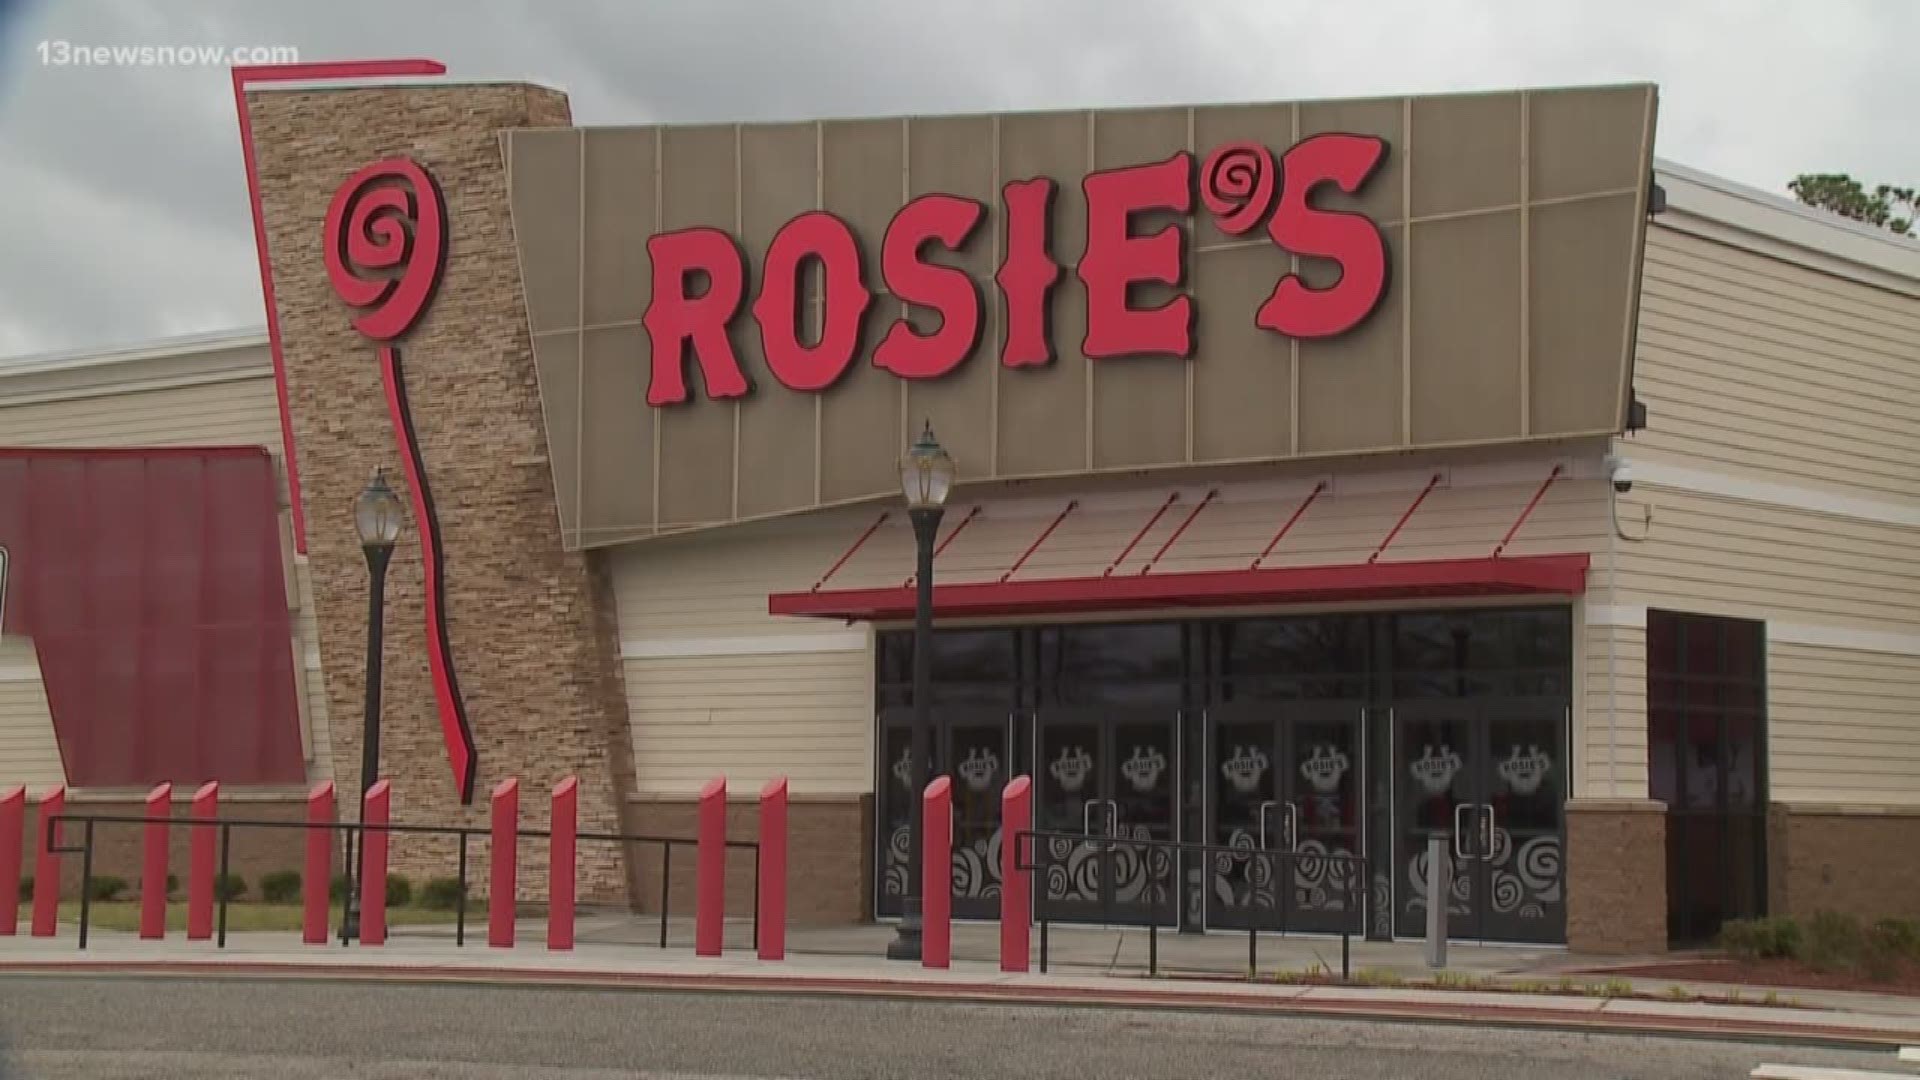 For the month of April 2020, Rosie's will be giving away 20,000 grab and go meals for first responders and essential employees fighting against the coronavirus.